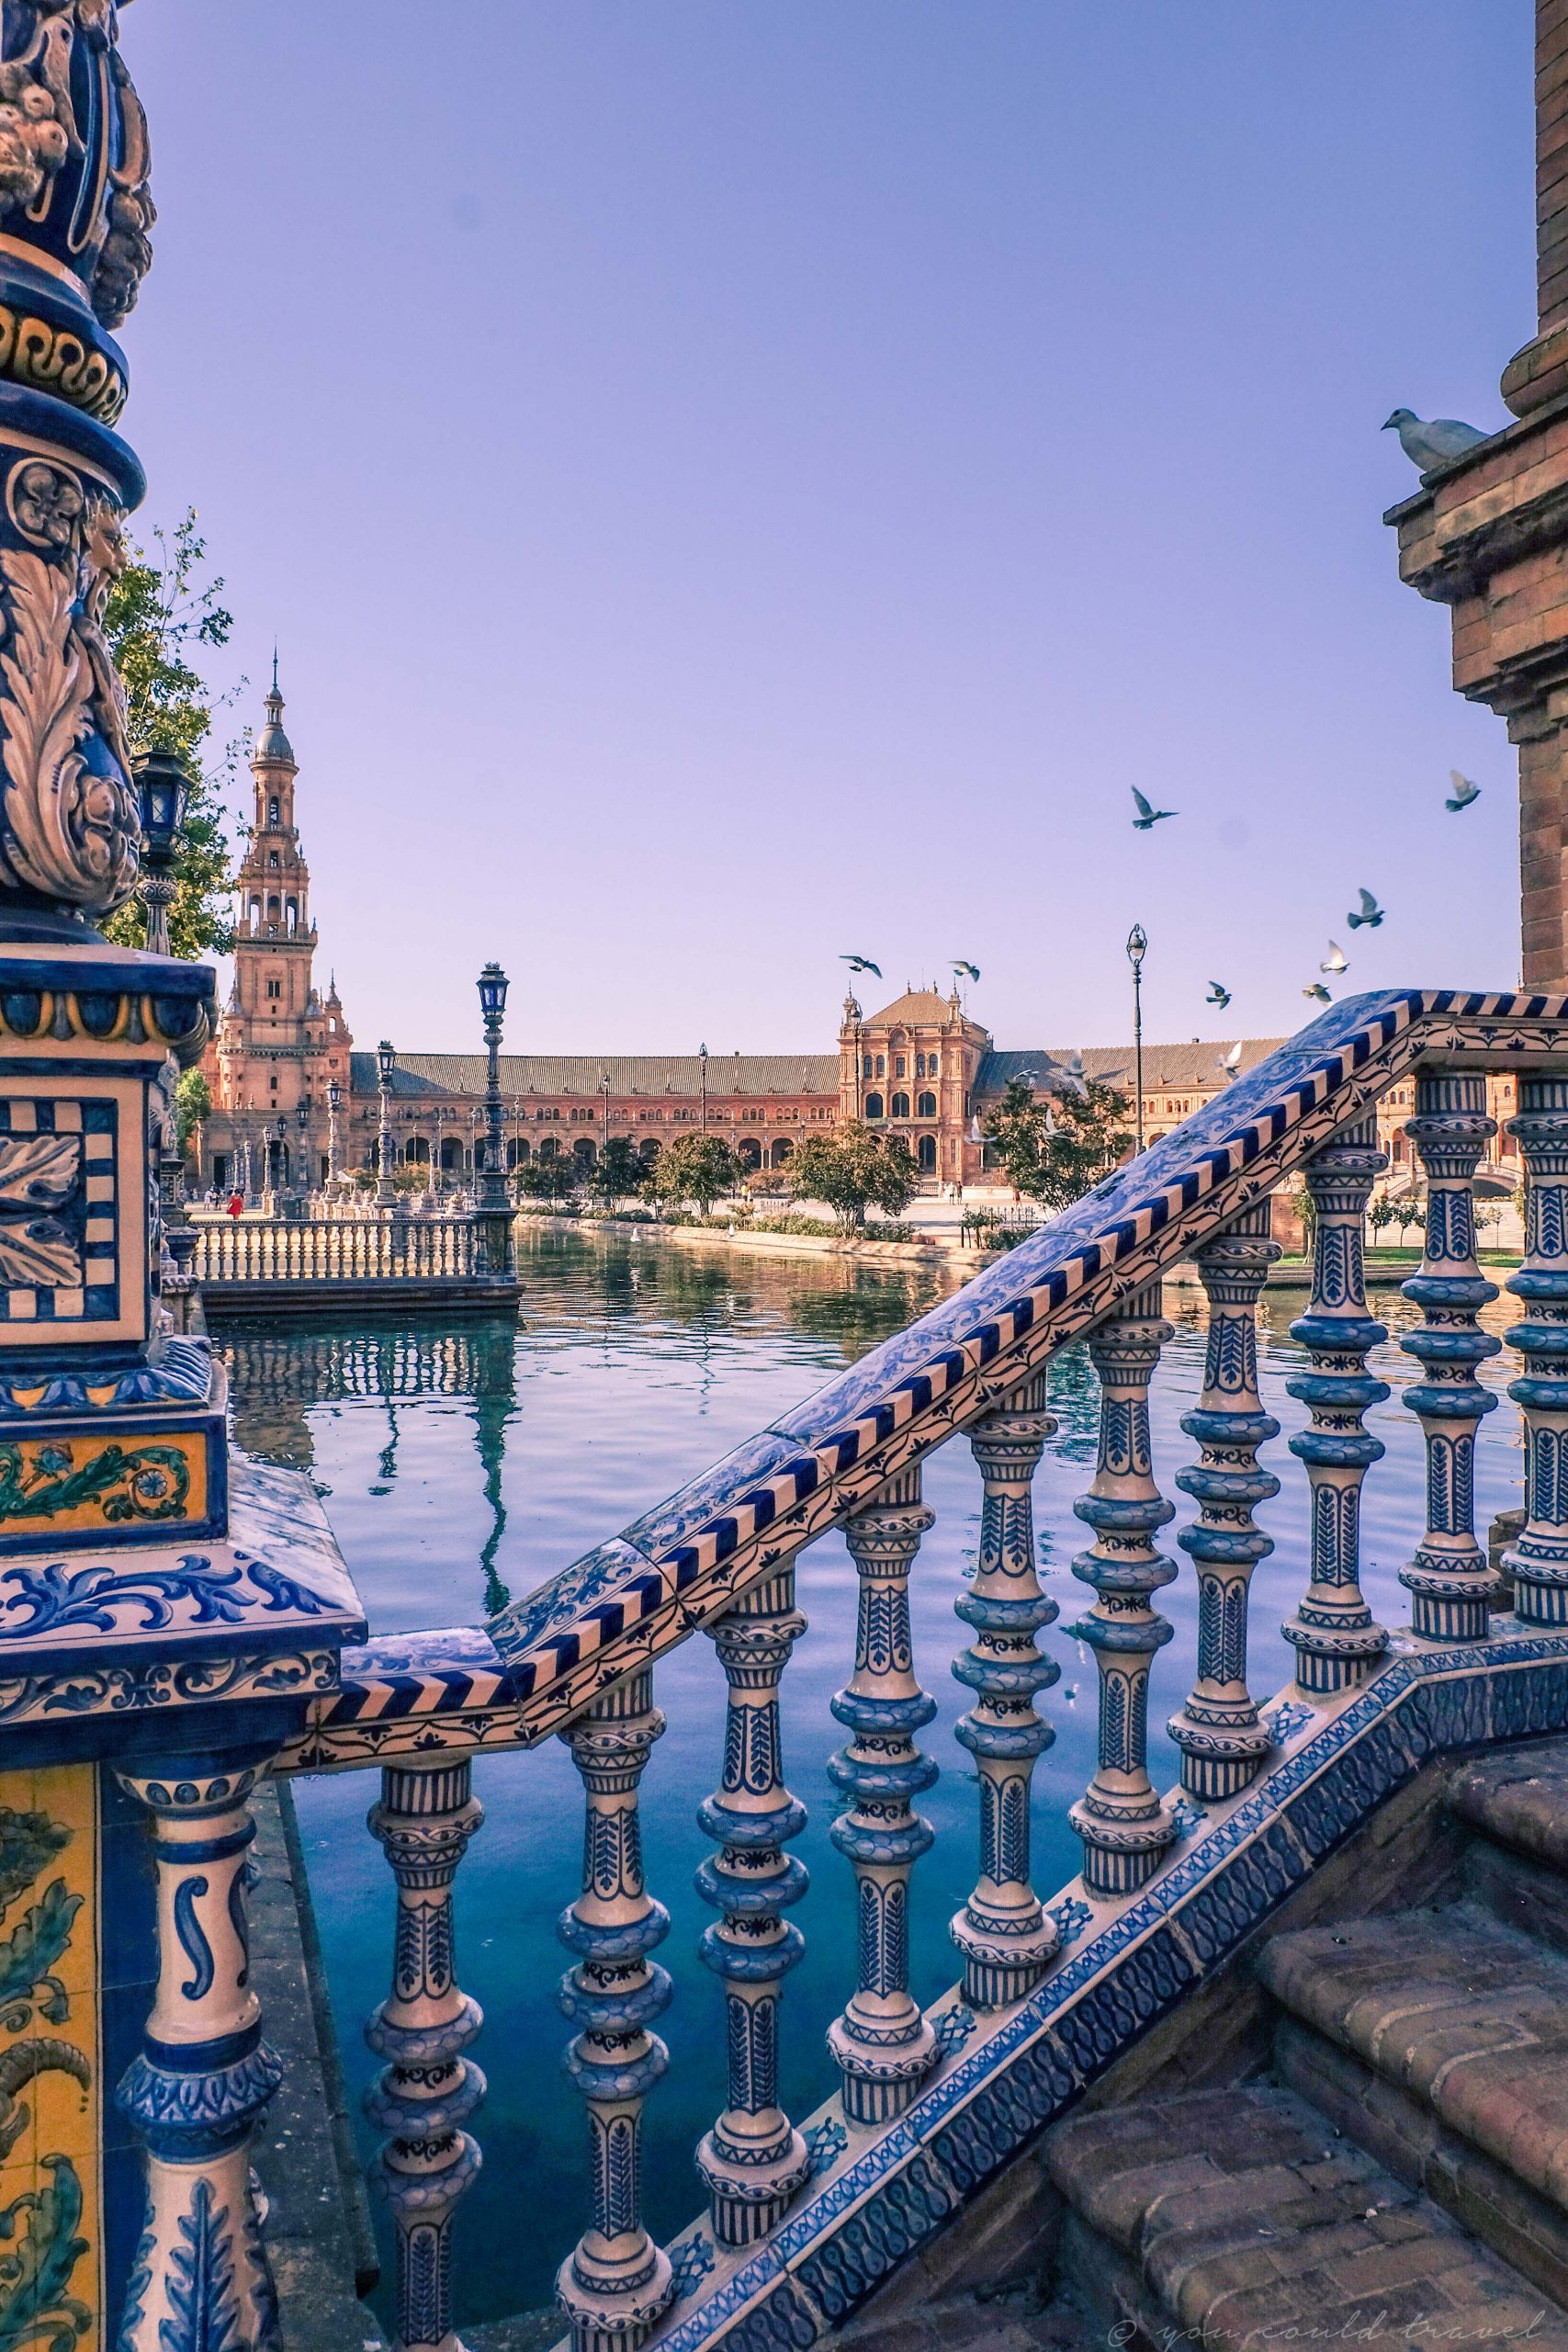 The beautiful Plaza de Espana in Seville with its water and colourful rails